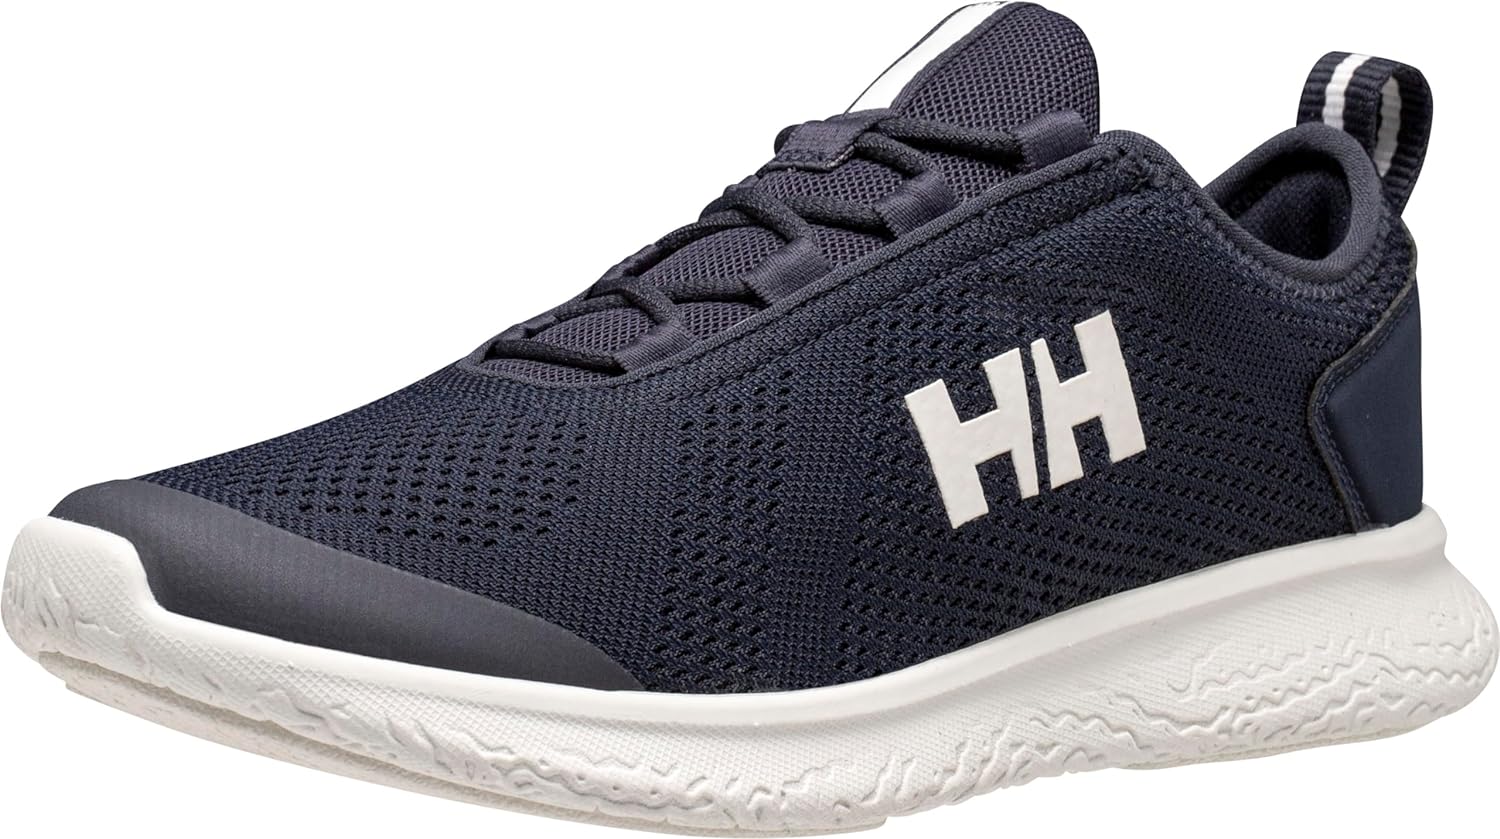 You are currently viewing Helly Hansen Womens Supalight Medley Shoes Review